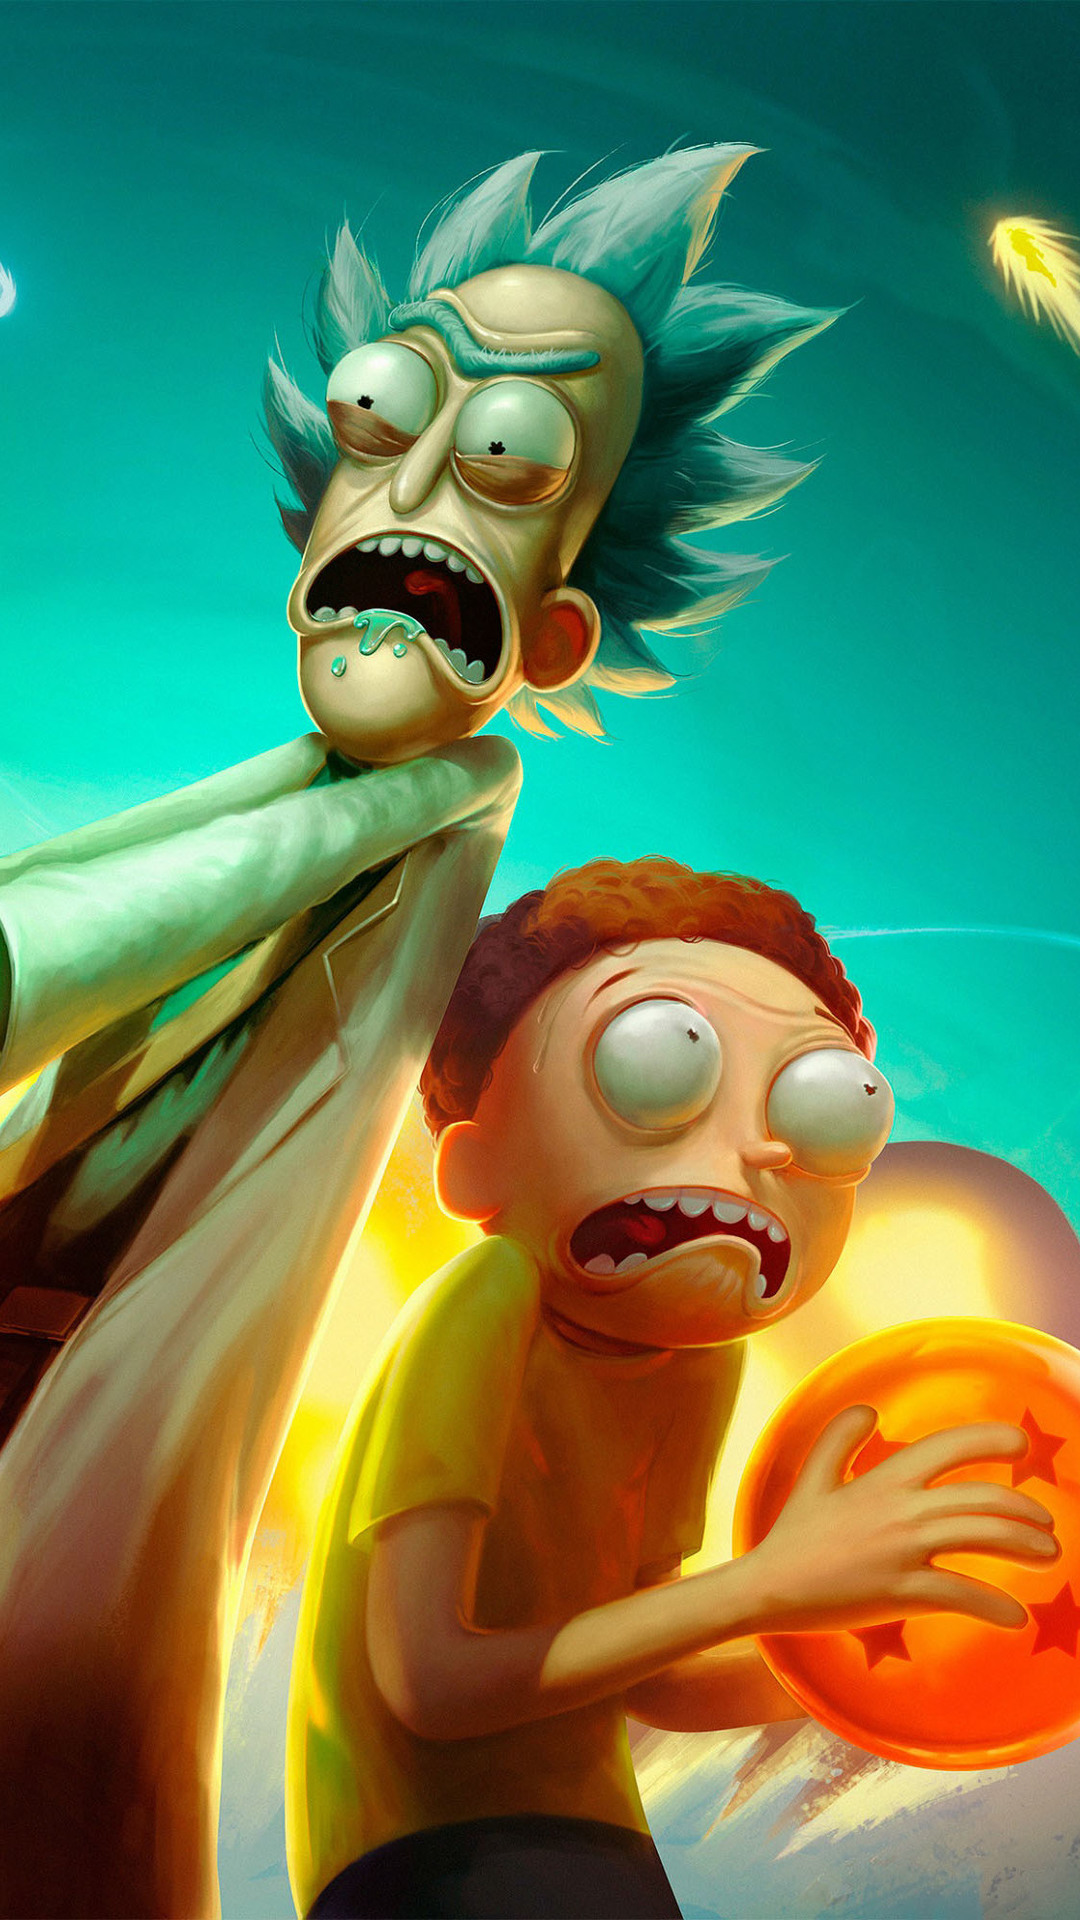 1080x1920 rick, morty, rick and morty, cartoons, tv shows, hd, animated tv series, artist, artwork for iPhone 8 wallpaper